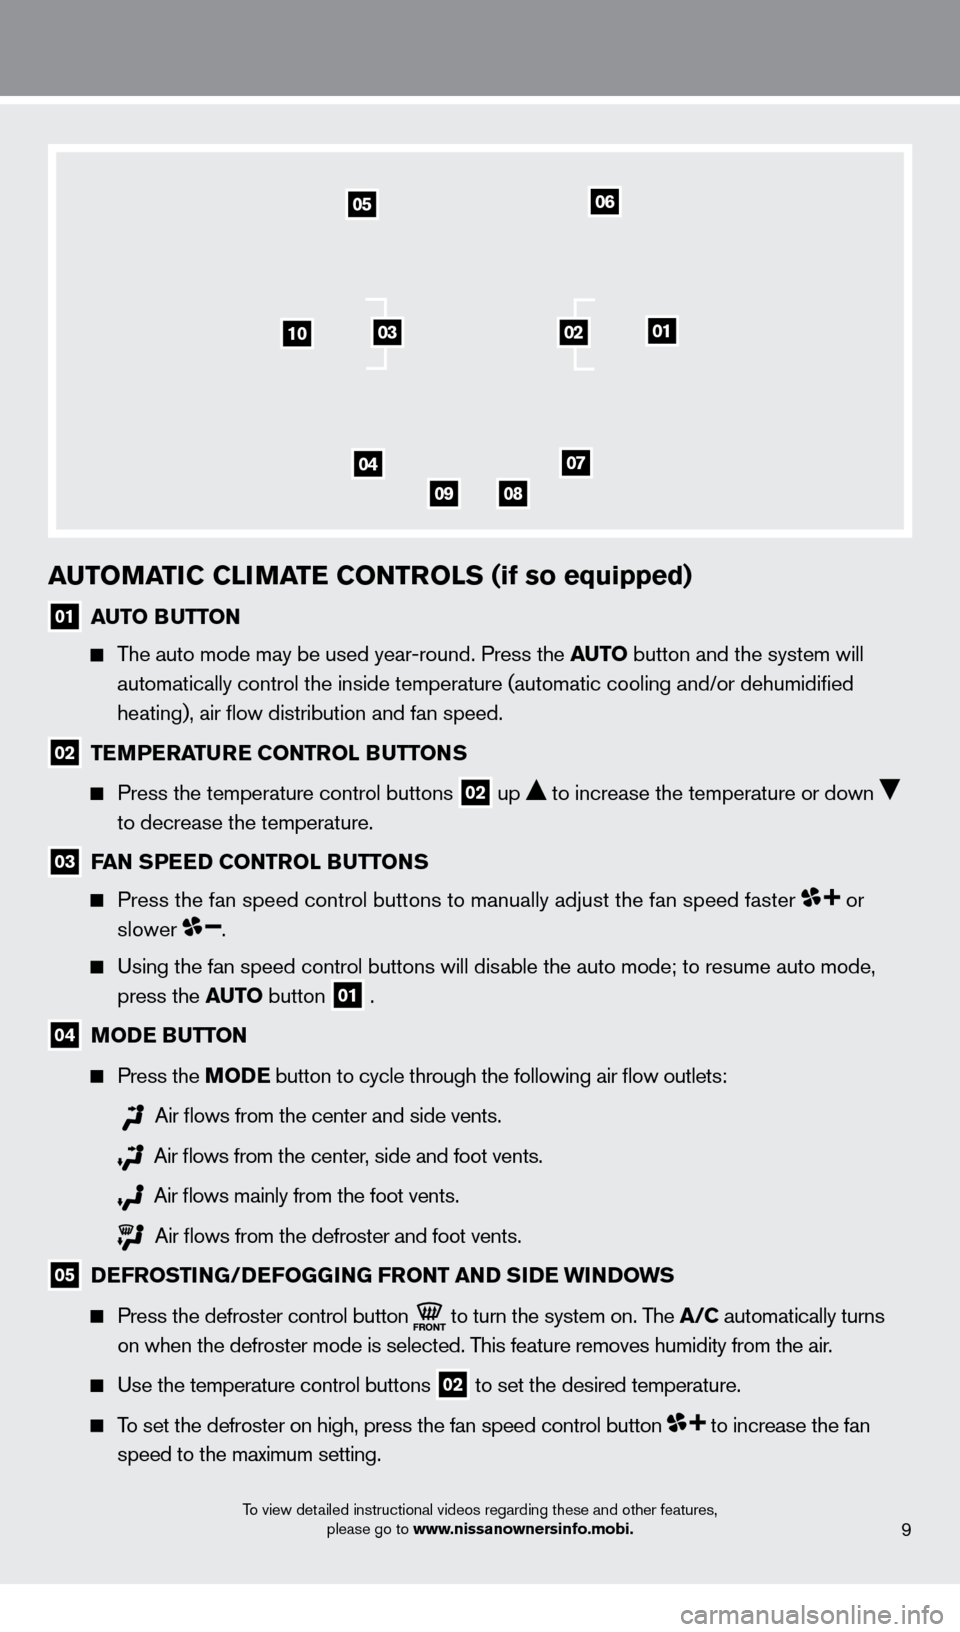 NISSAN CUBE 2013 3.G Quick Reference Guide 9
auTOMaTIC CLIMaTe CONTrOLS (if so equipped)
01 auT O BuTT ON
 
   The auto mode may be used year-round. Press the auTO button and the system will   
   

 
automatically control the inside temperatu